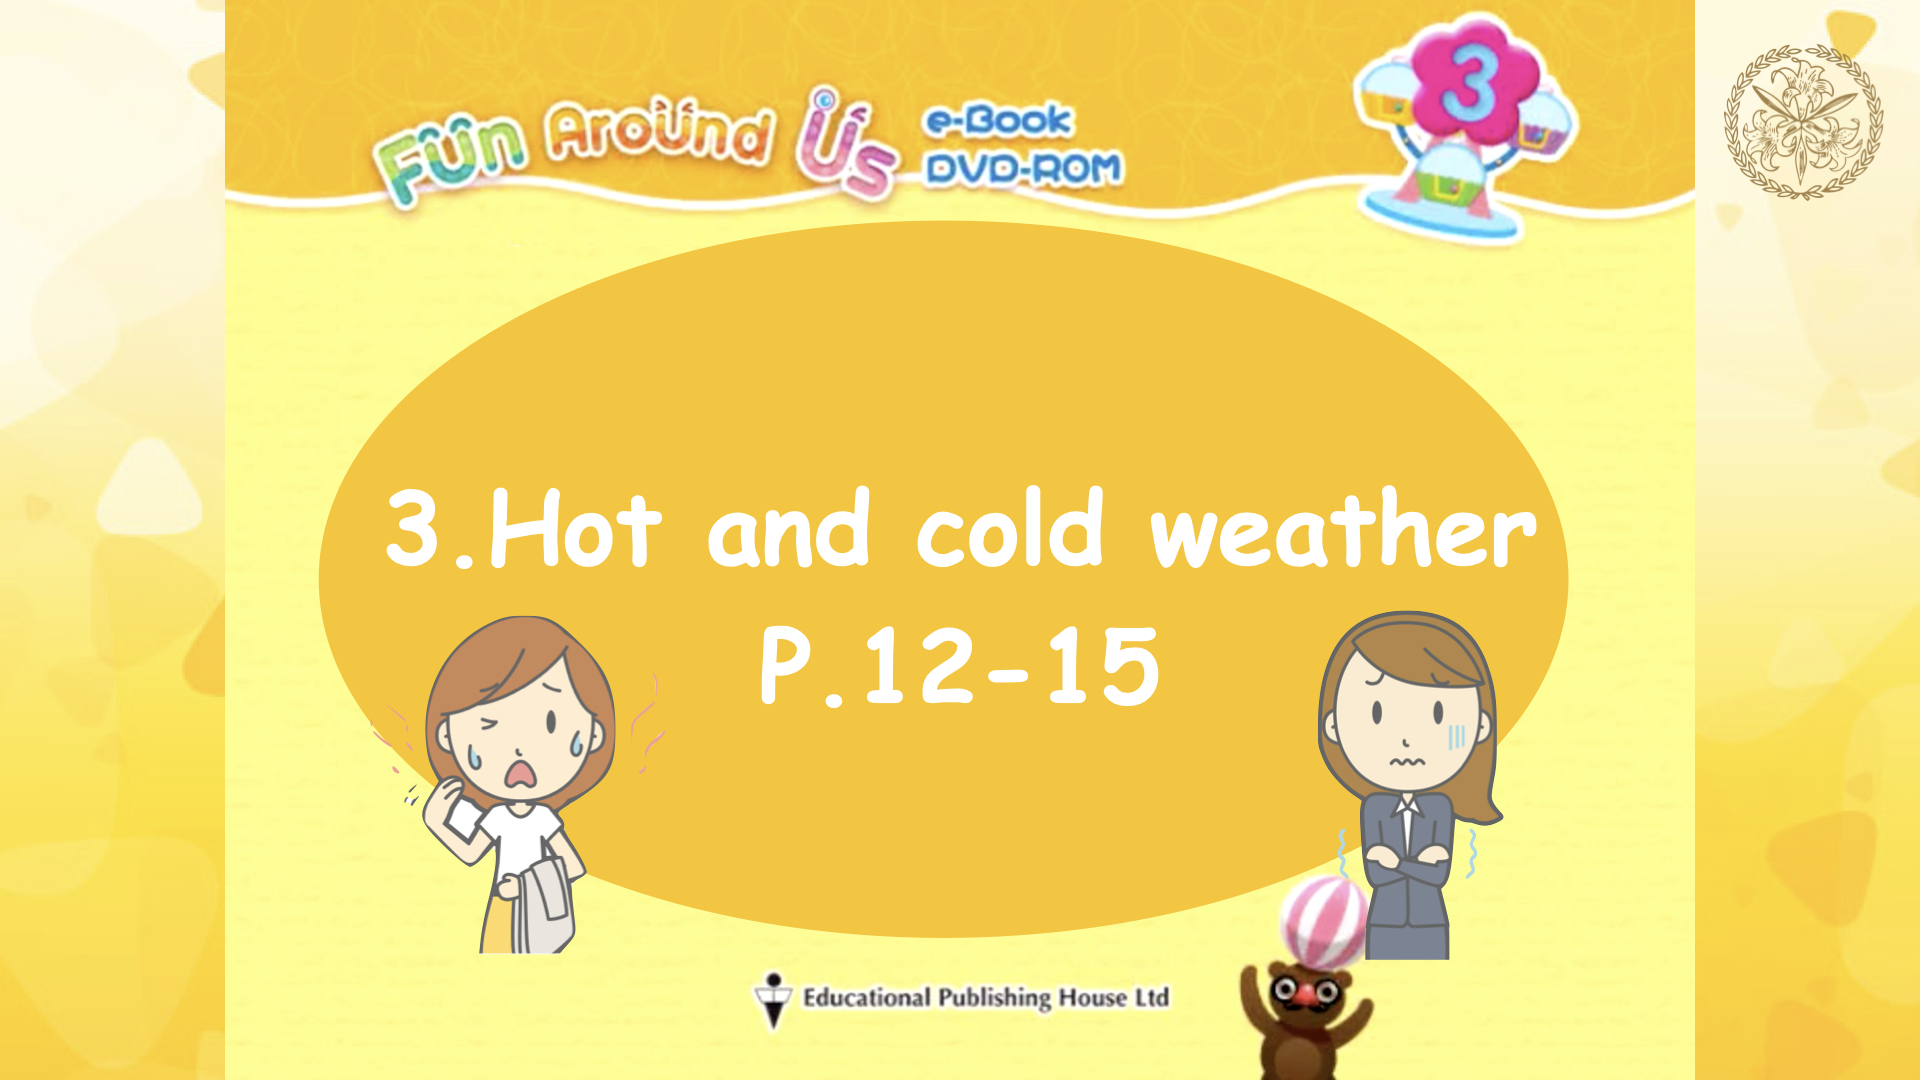 Hot and cold weather Part 1